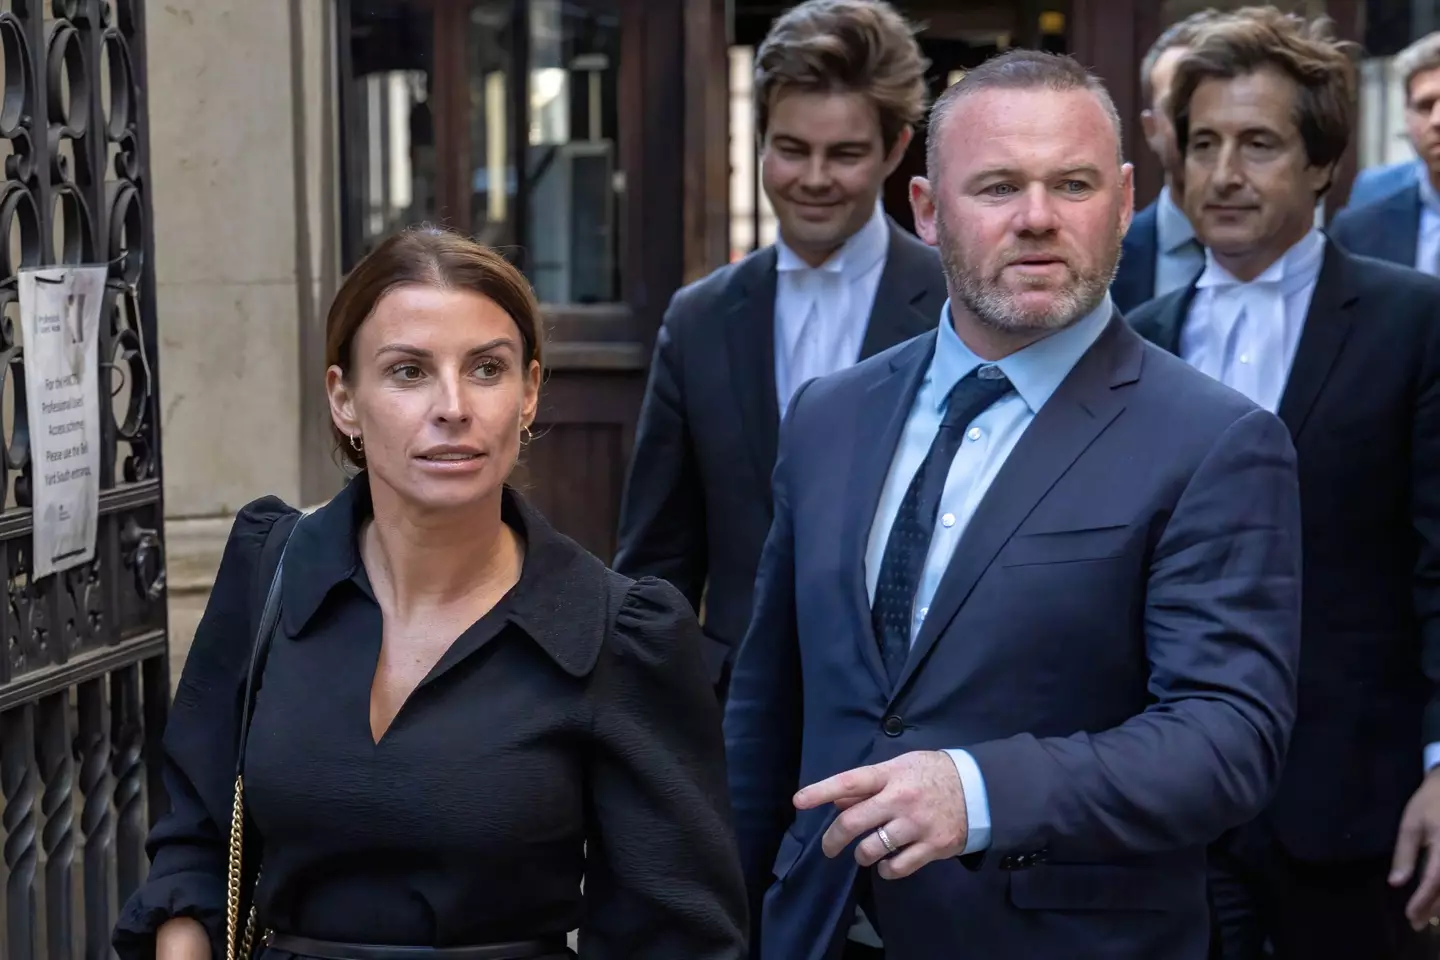 The ‘Wagatha Christie’ libel trial between Rebekah Vardy and Coleen Rooney (pictured) came to an end last week.